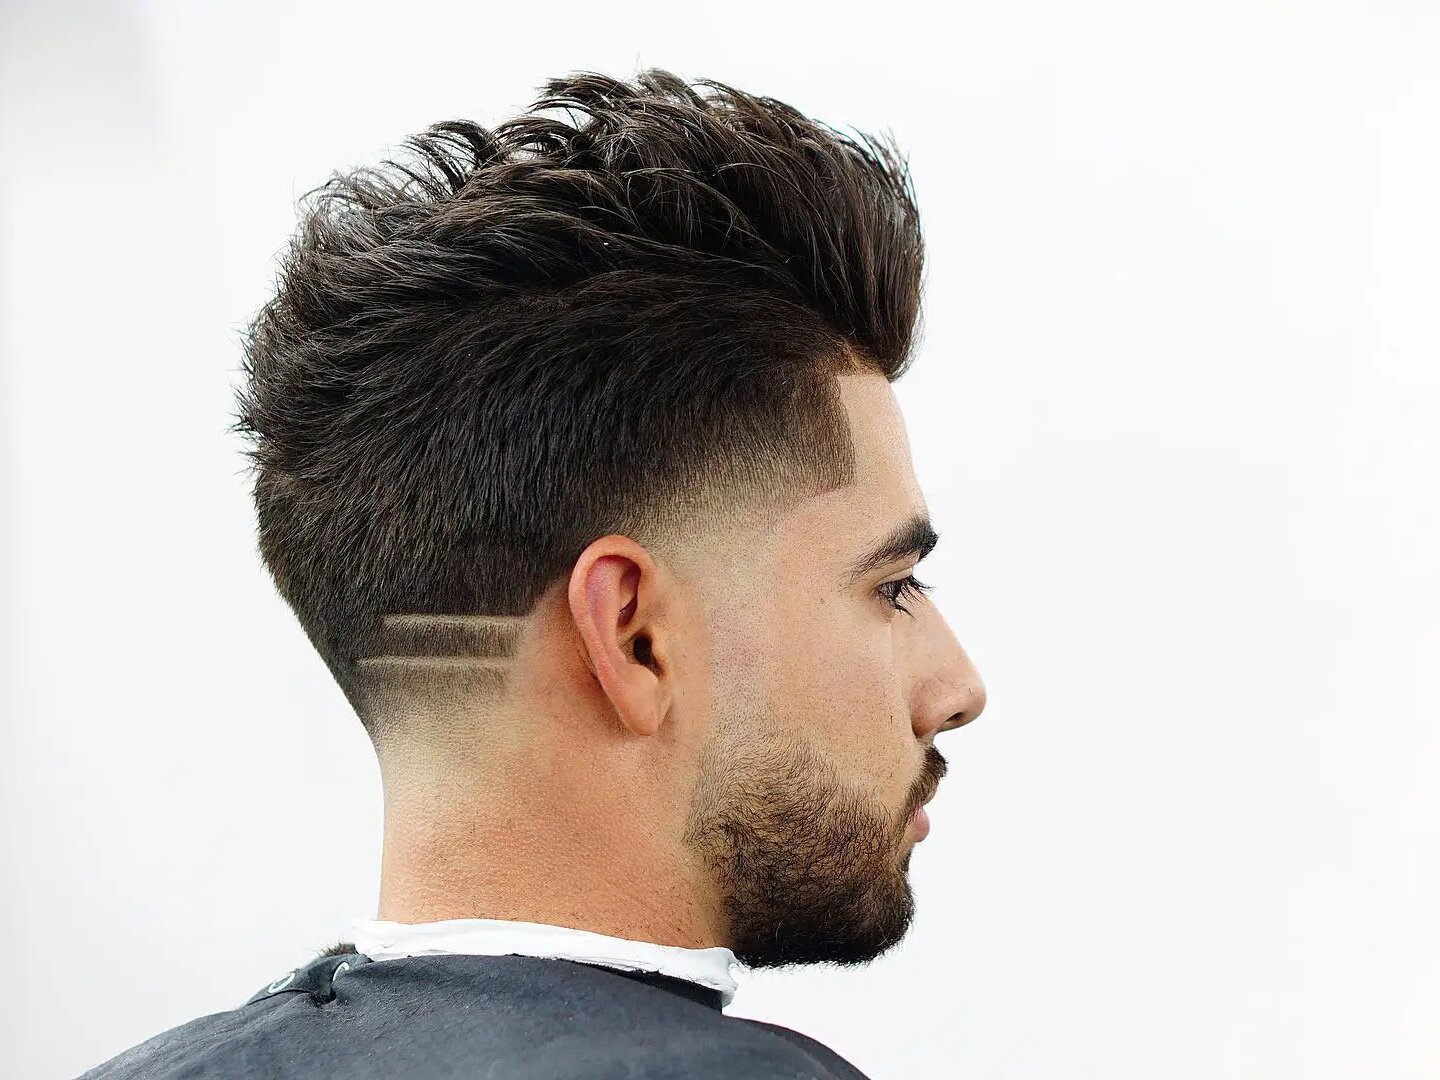 Man with 2 lines on side of head haircut